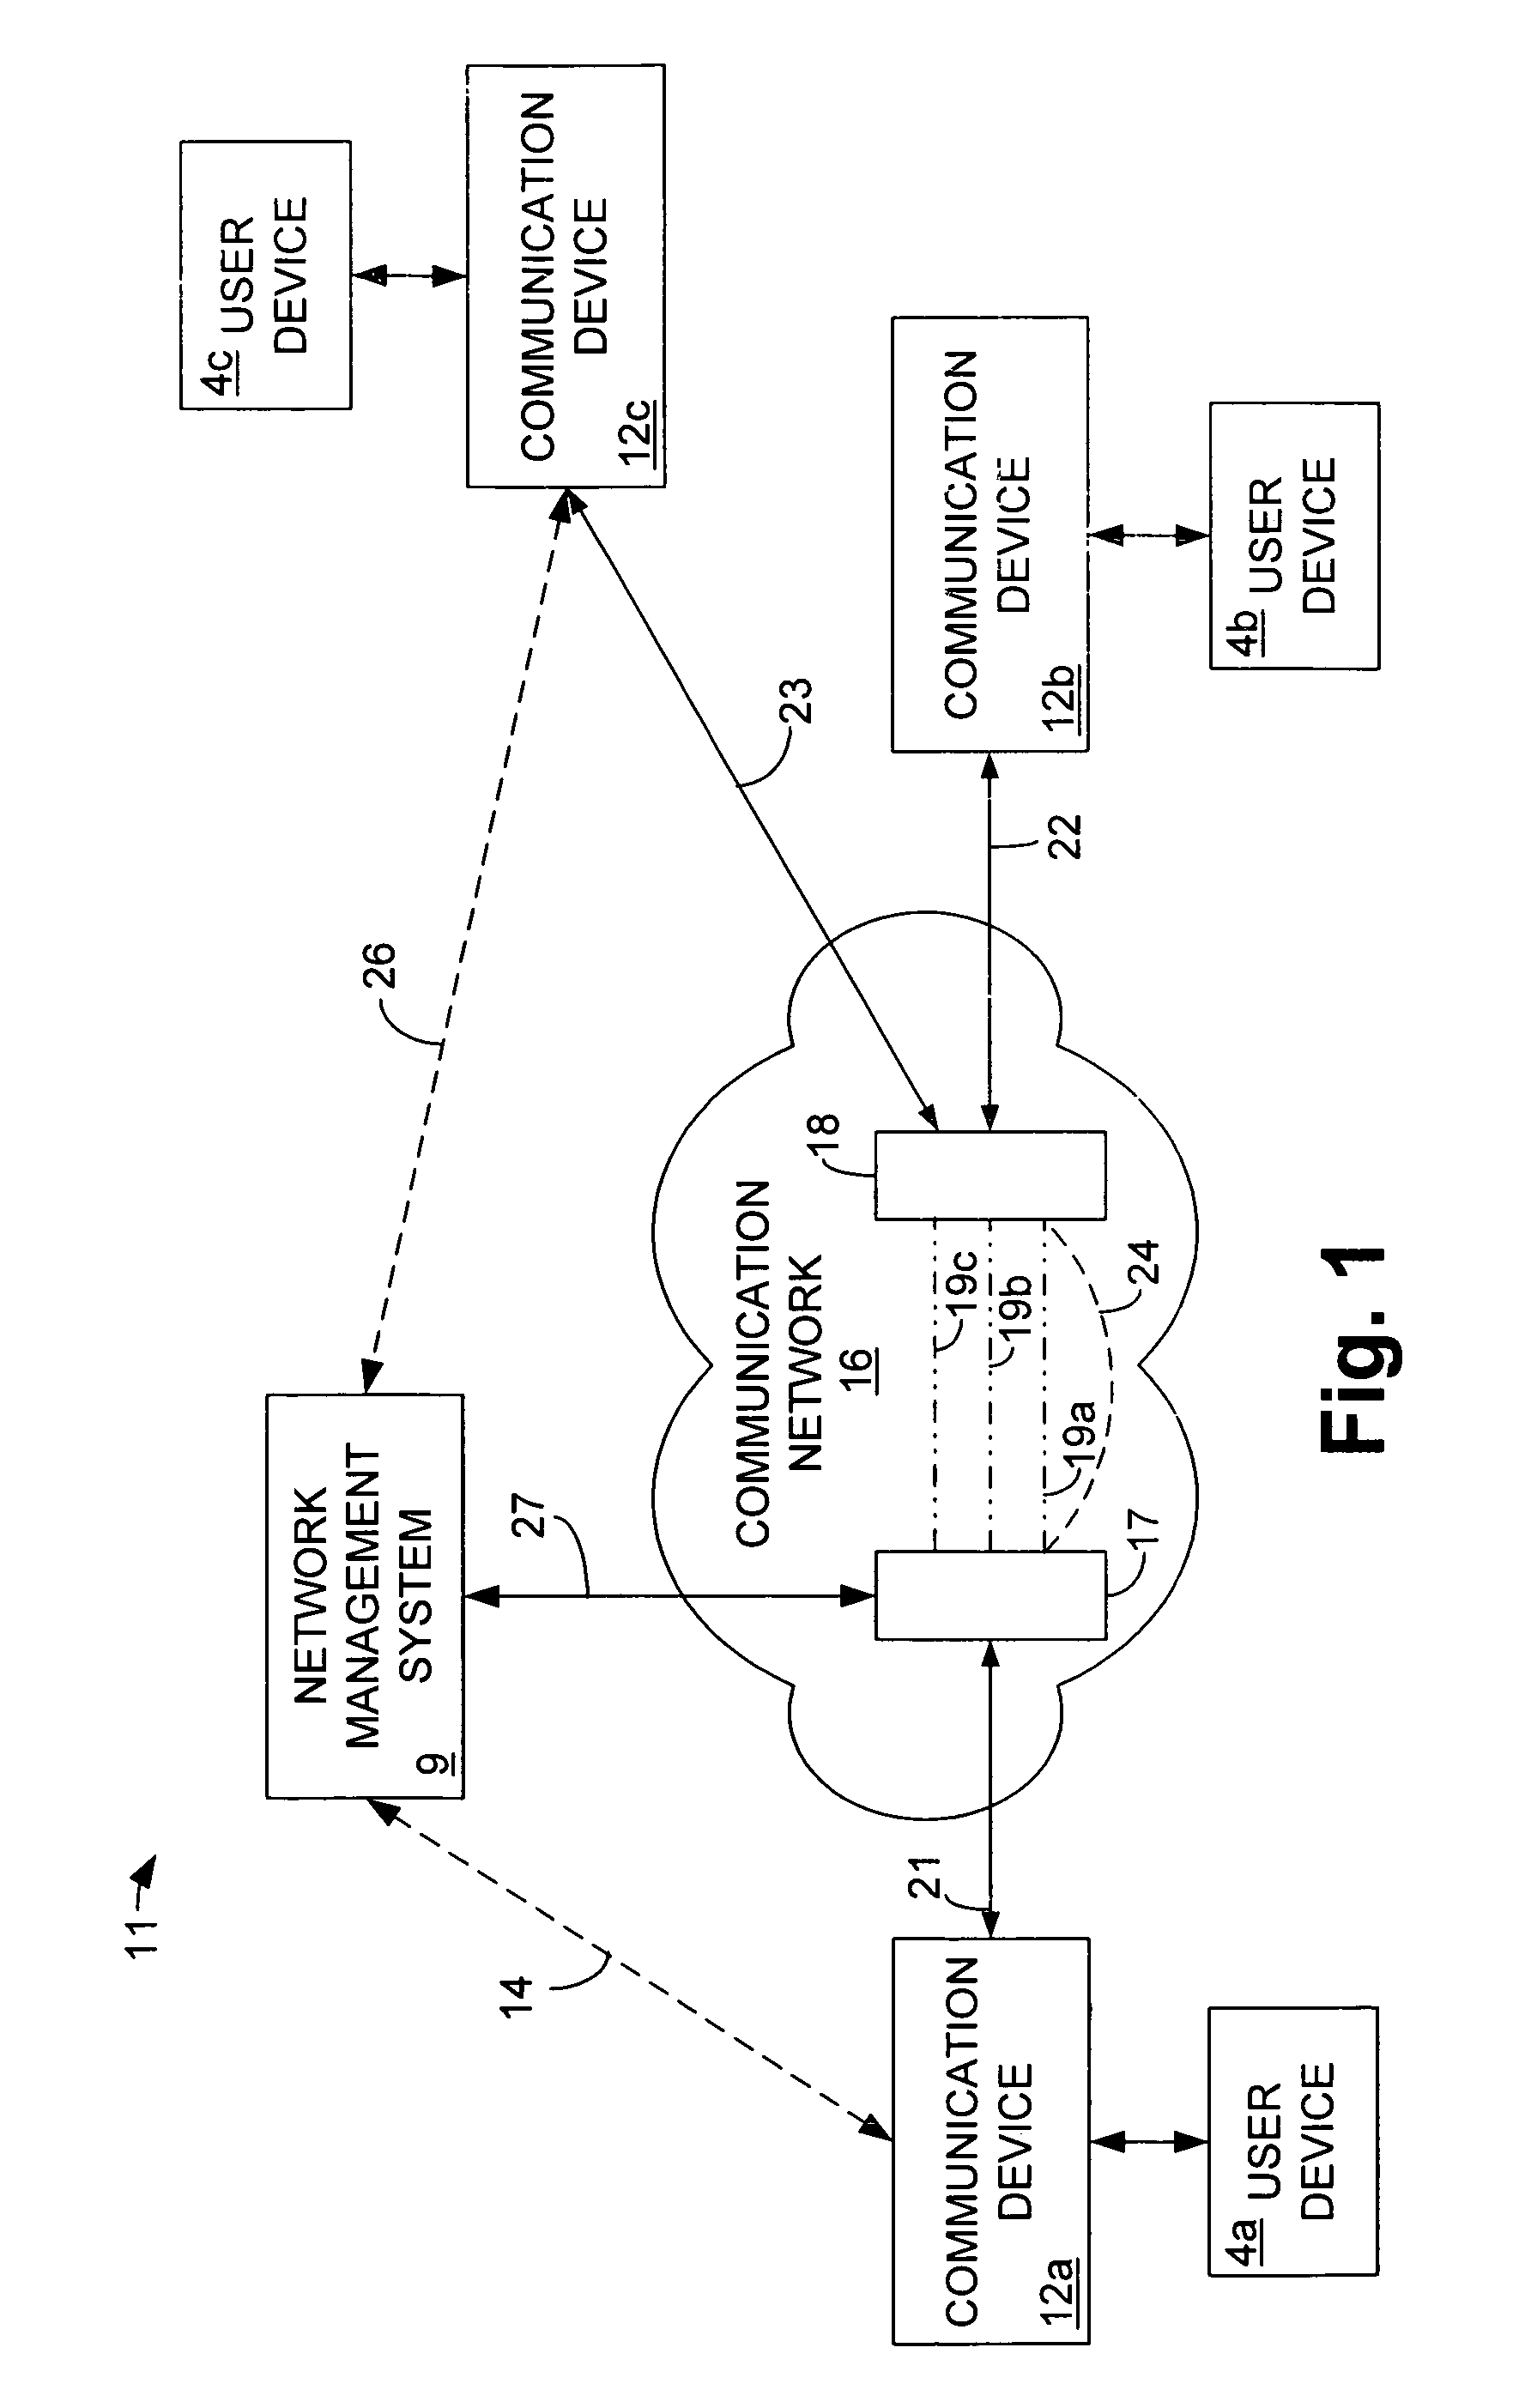 System and method for the collection and display of network performance data in a communication network